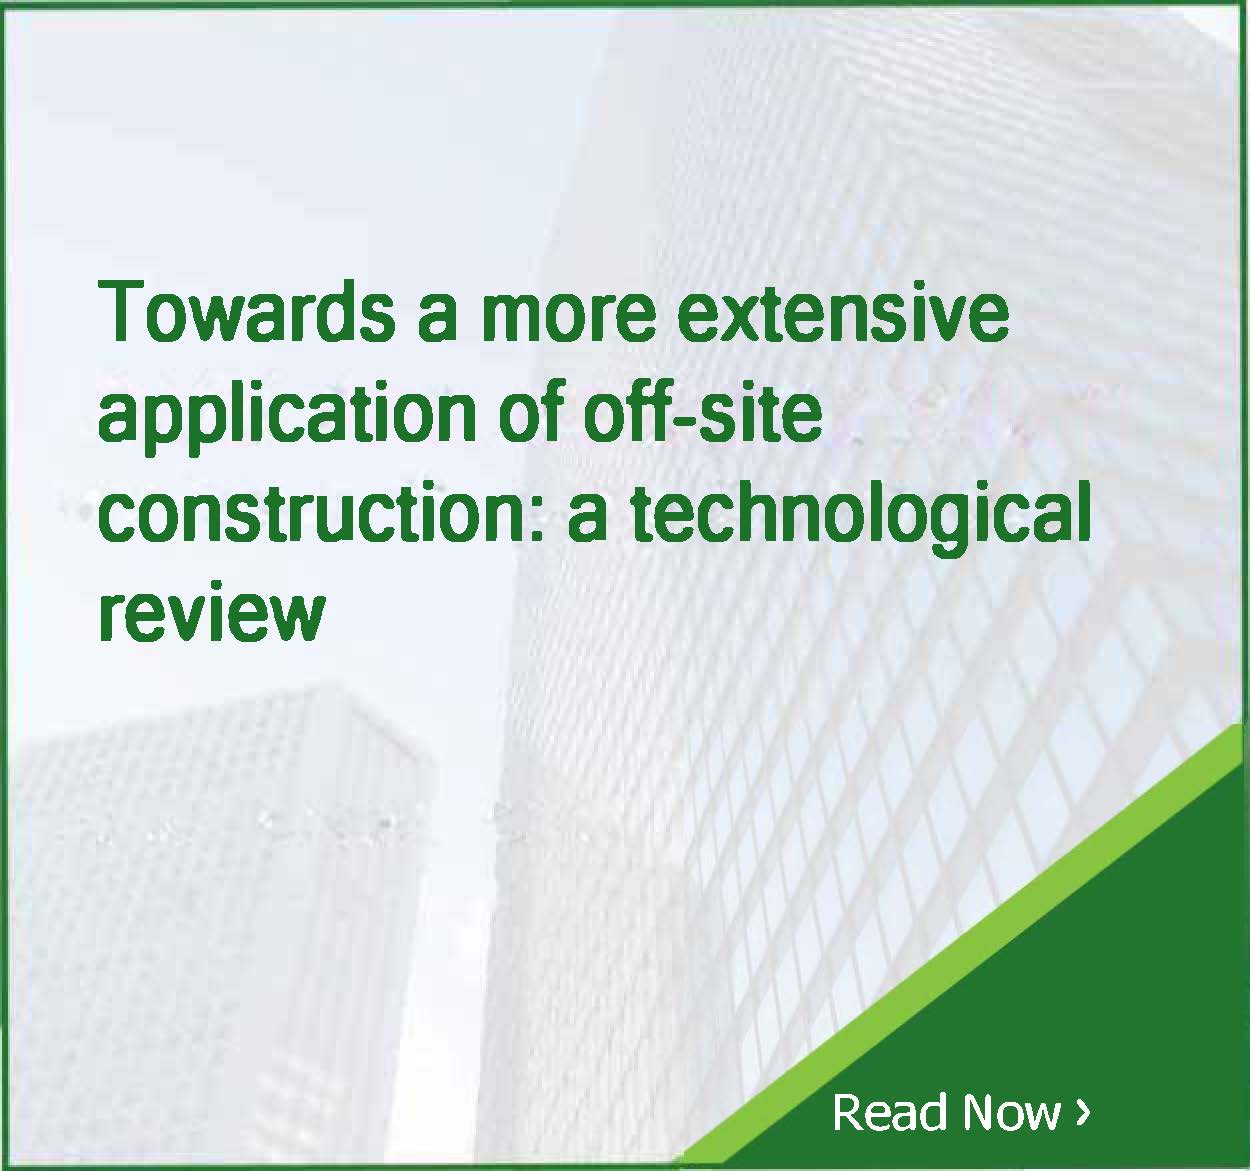 Towards a more extensive application of off-site construction: a technological review